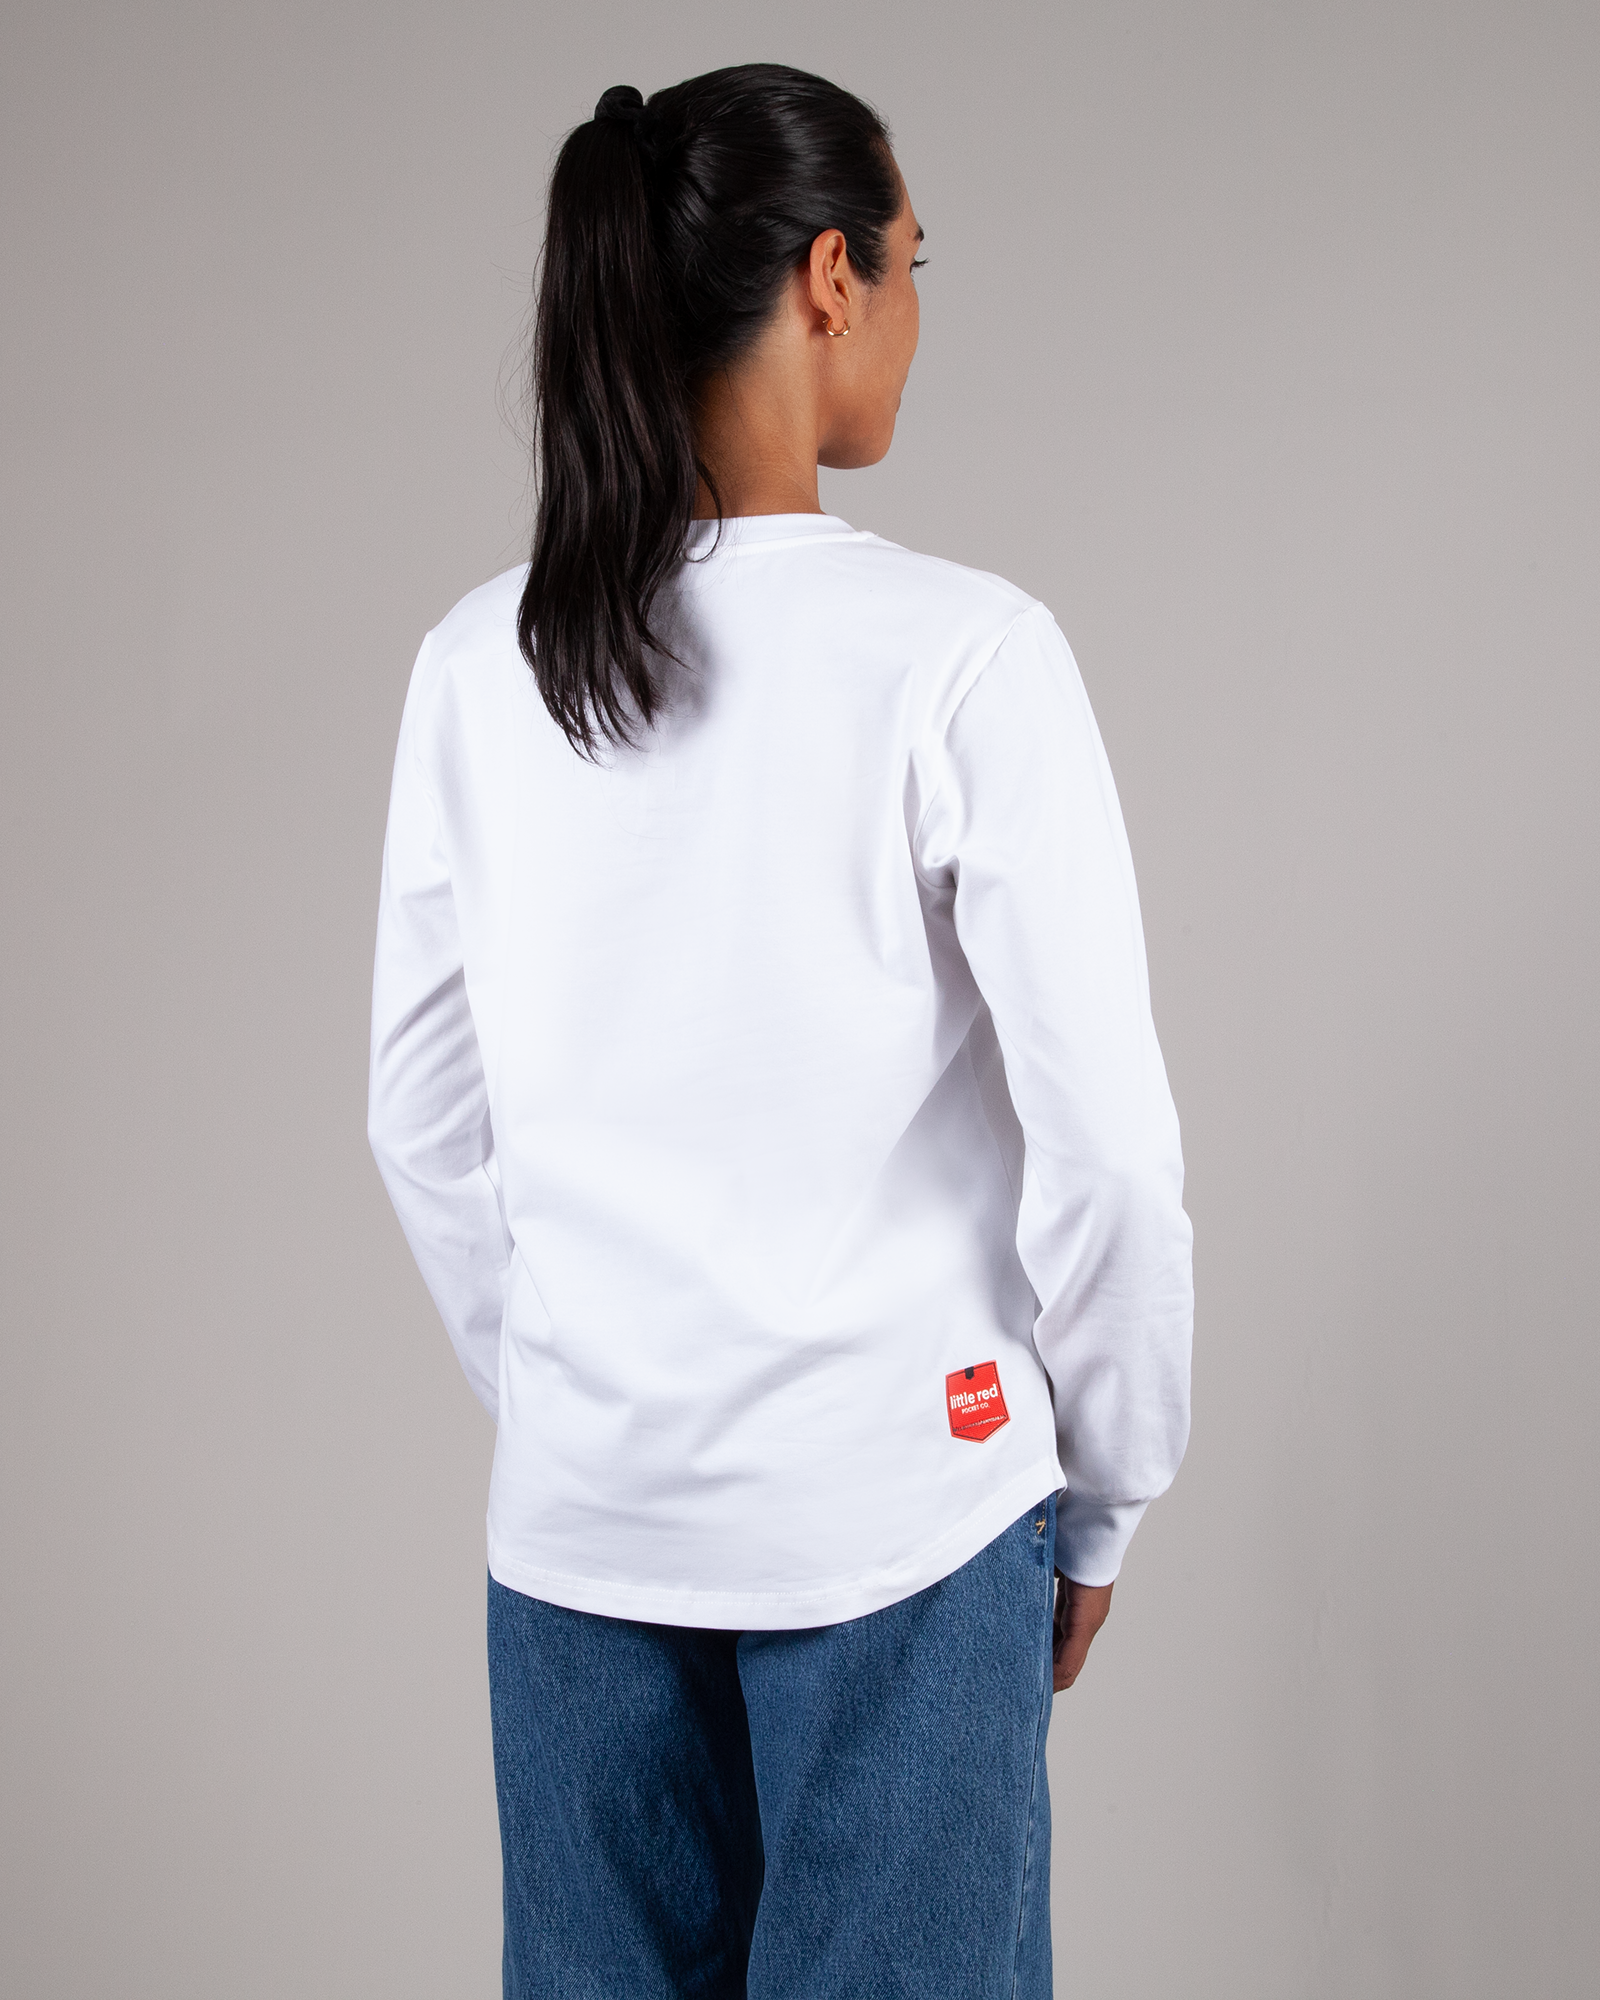 "Catch Some Clean Air" Female Long Sleeve Tee - White